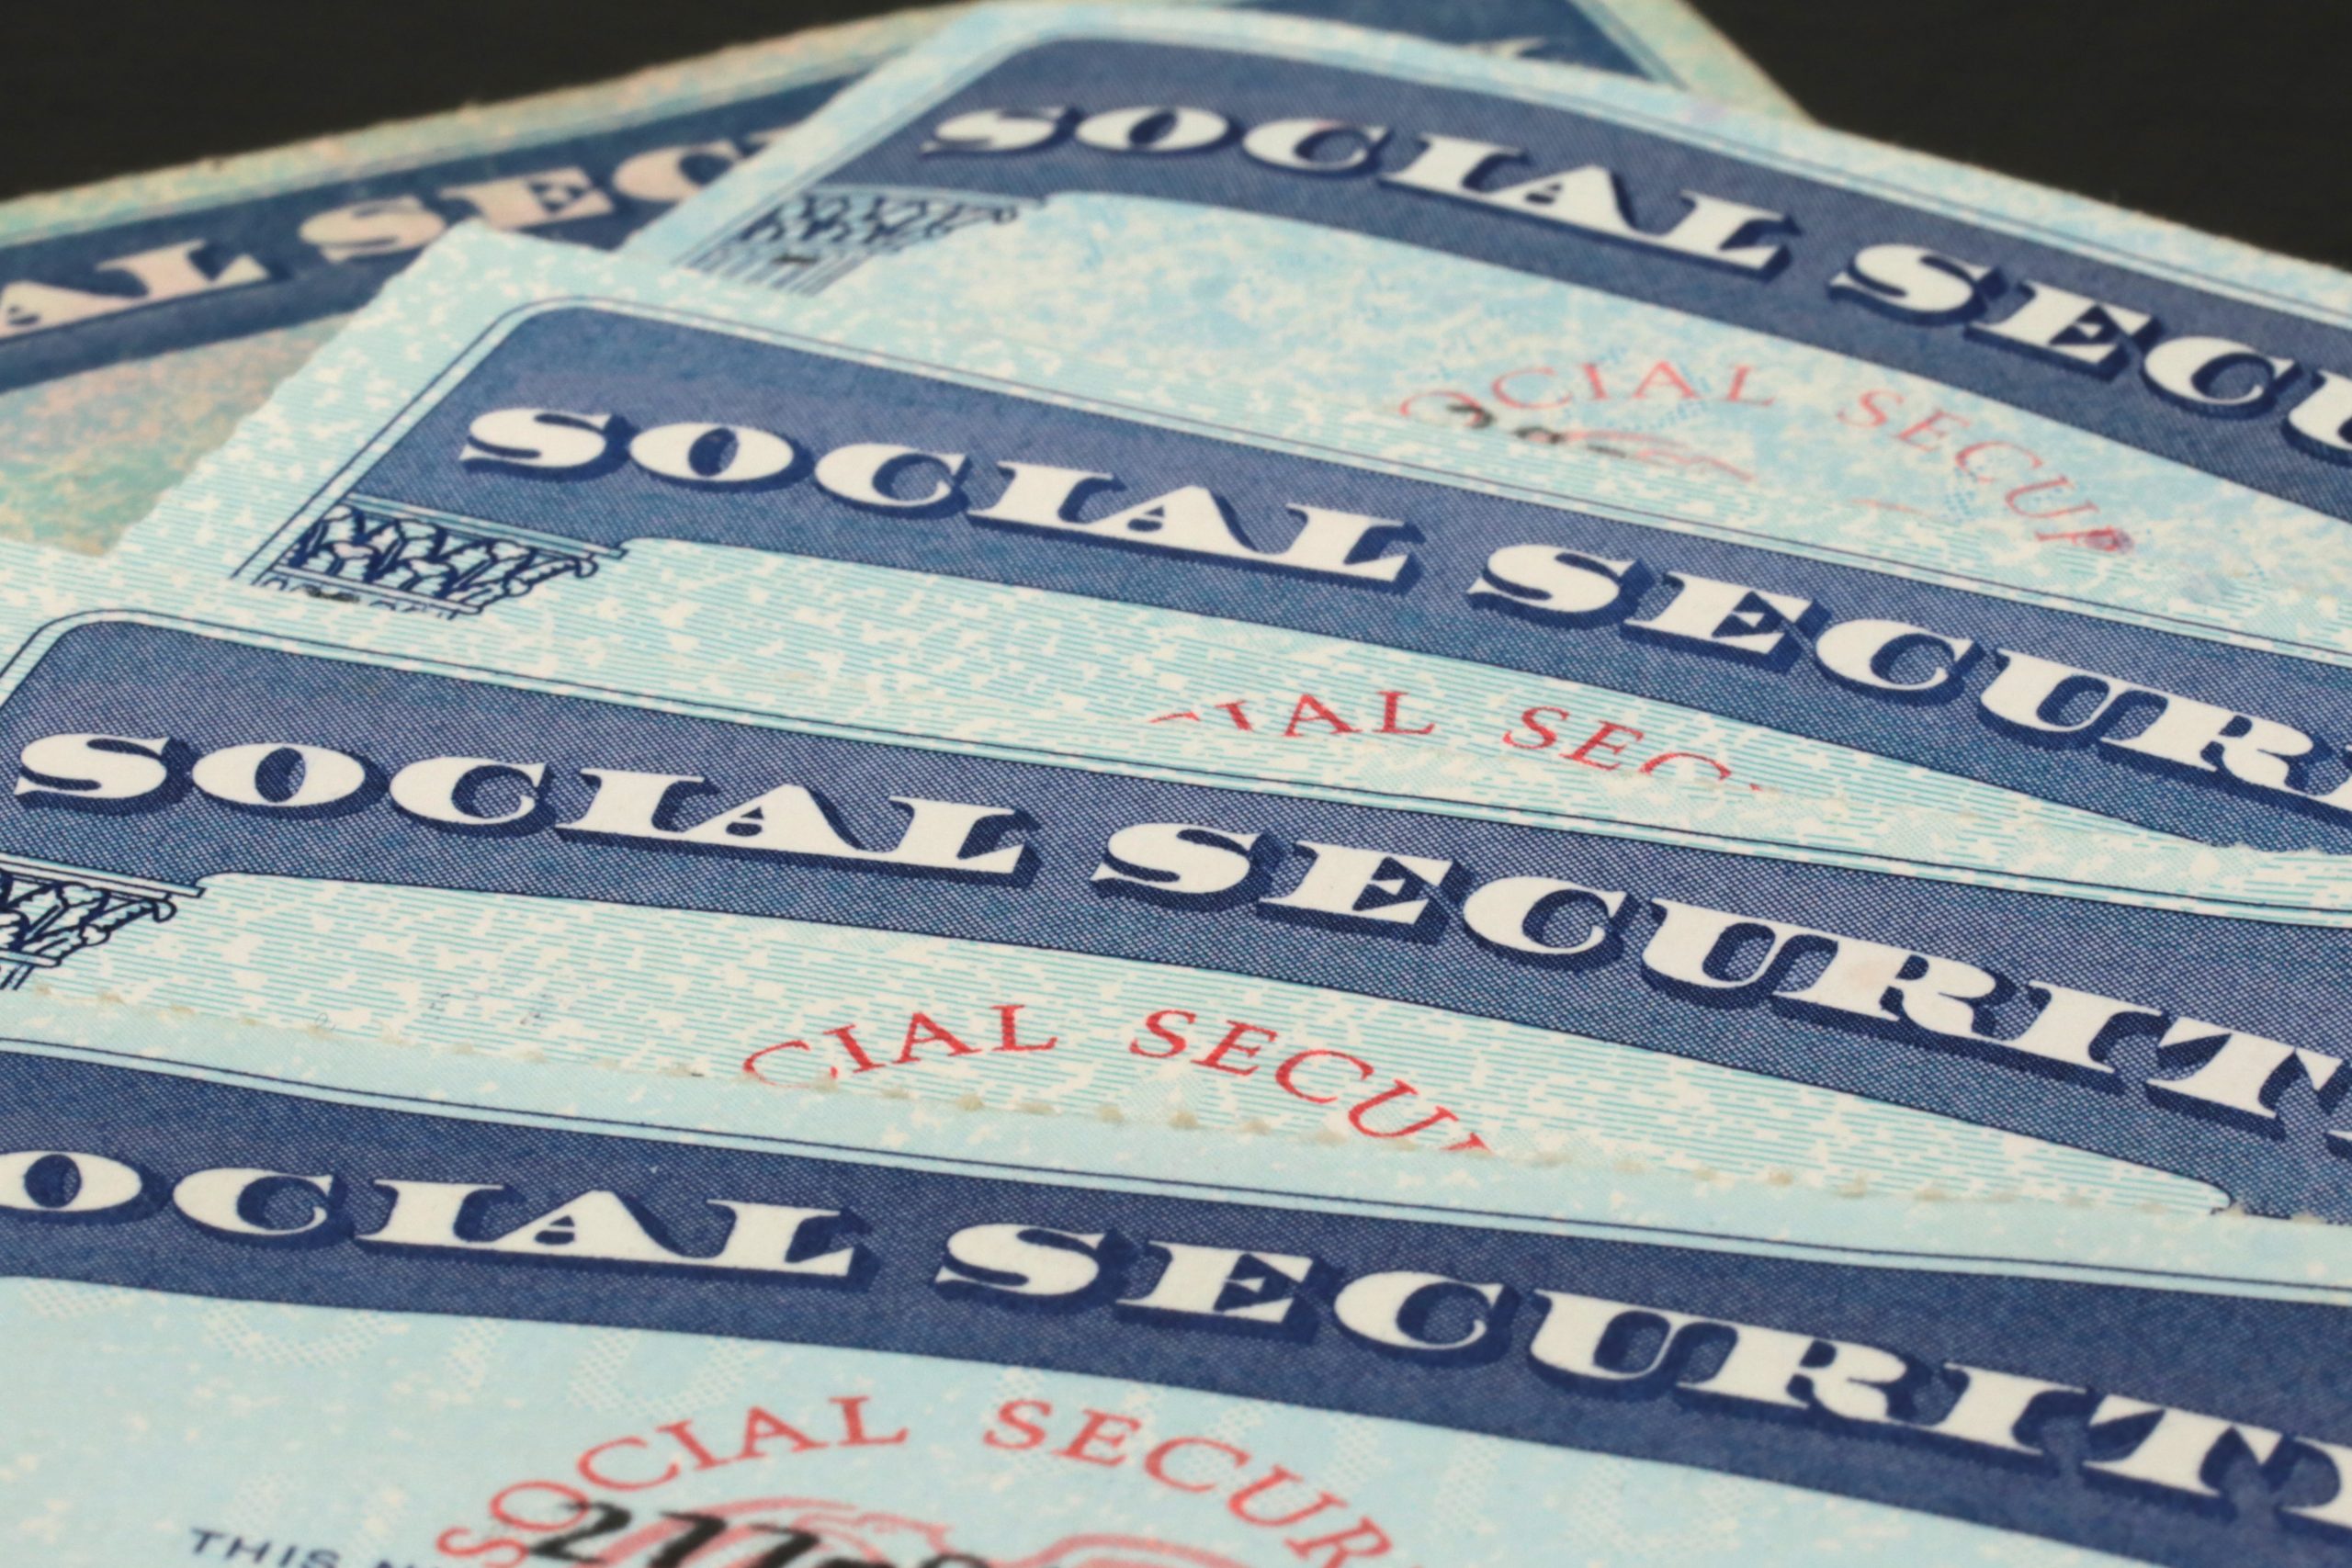 5 social security cards stacked and slightly fanned out.